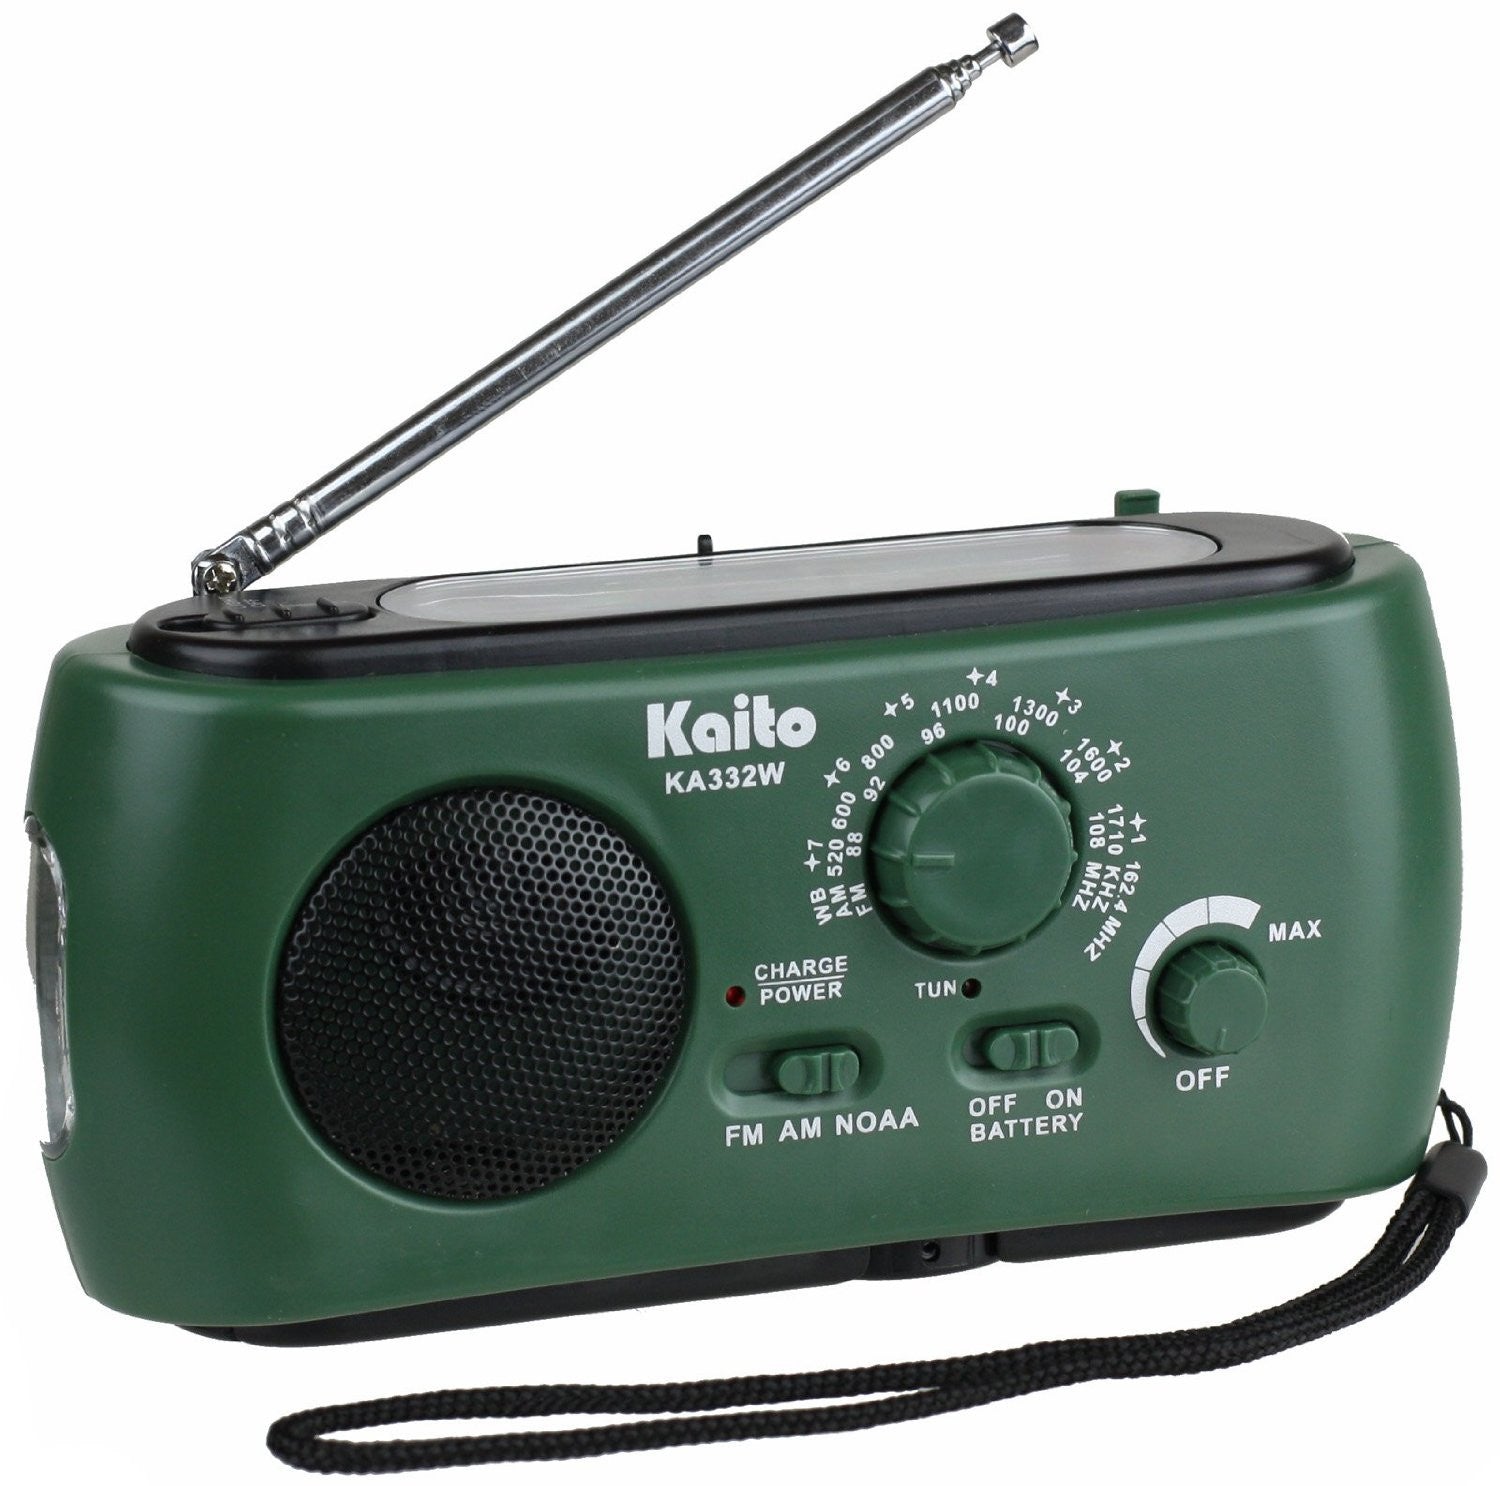 Kaito KA332W Portable Hand Crank Solar AM/FM NOAA Weather Radio with Cell Phone Charger & 3-LED Flashlight